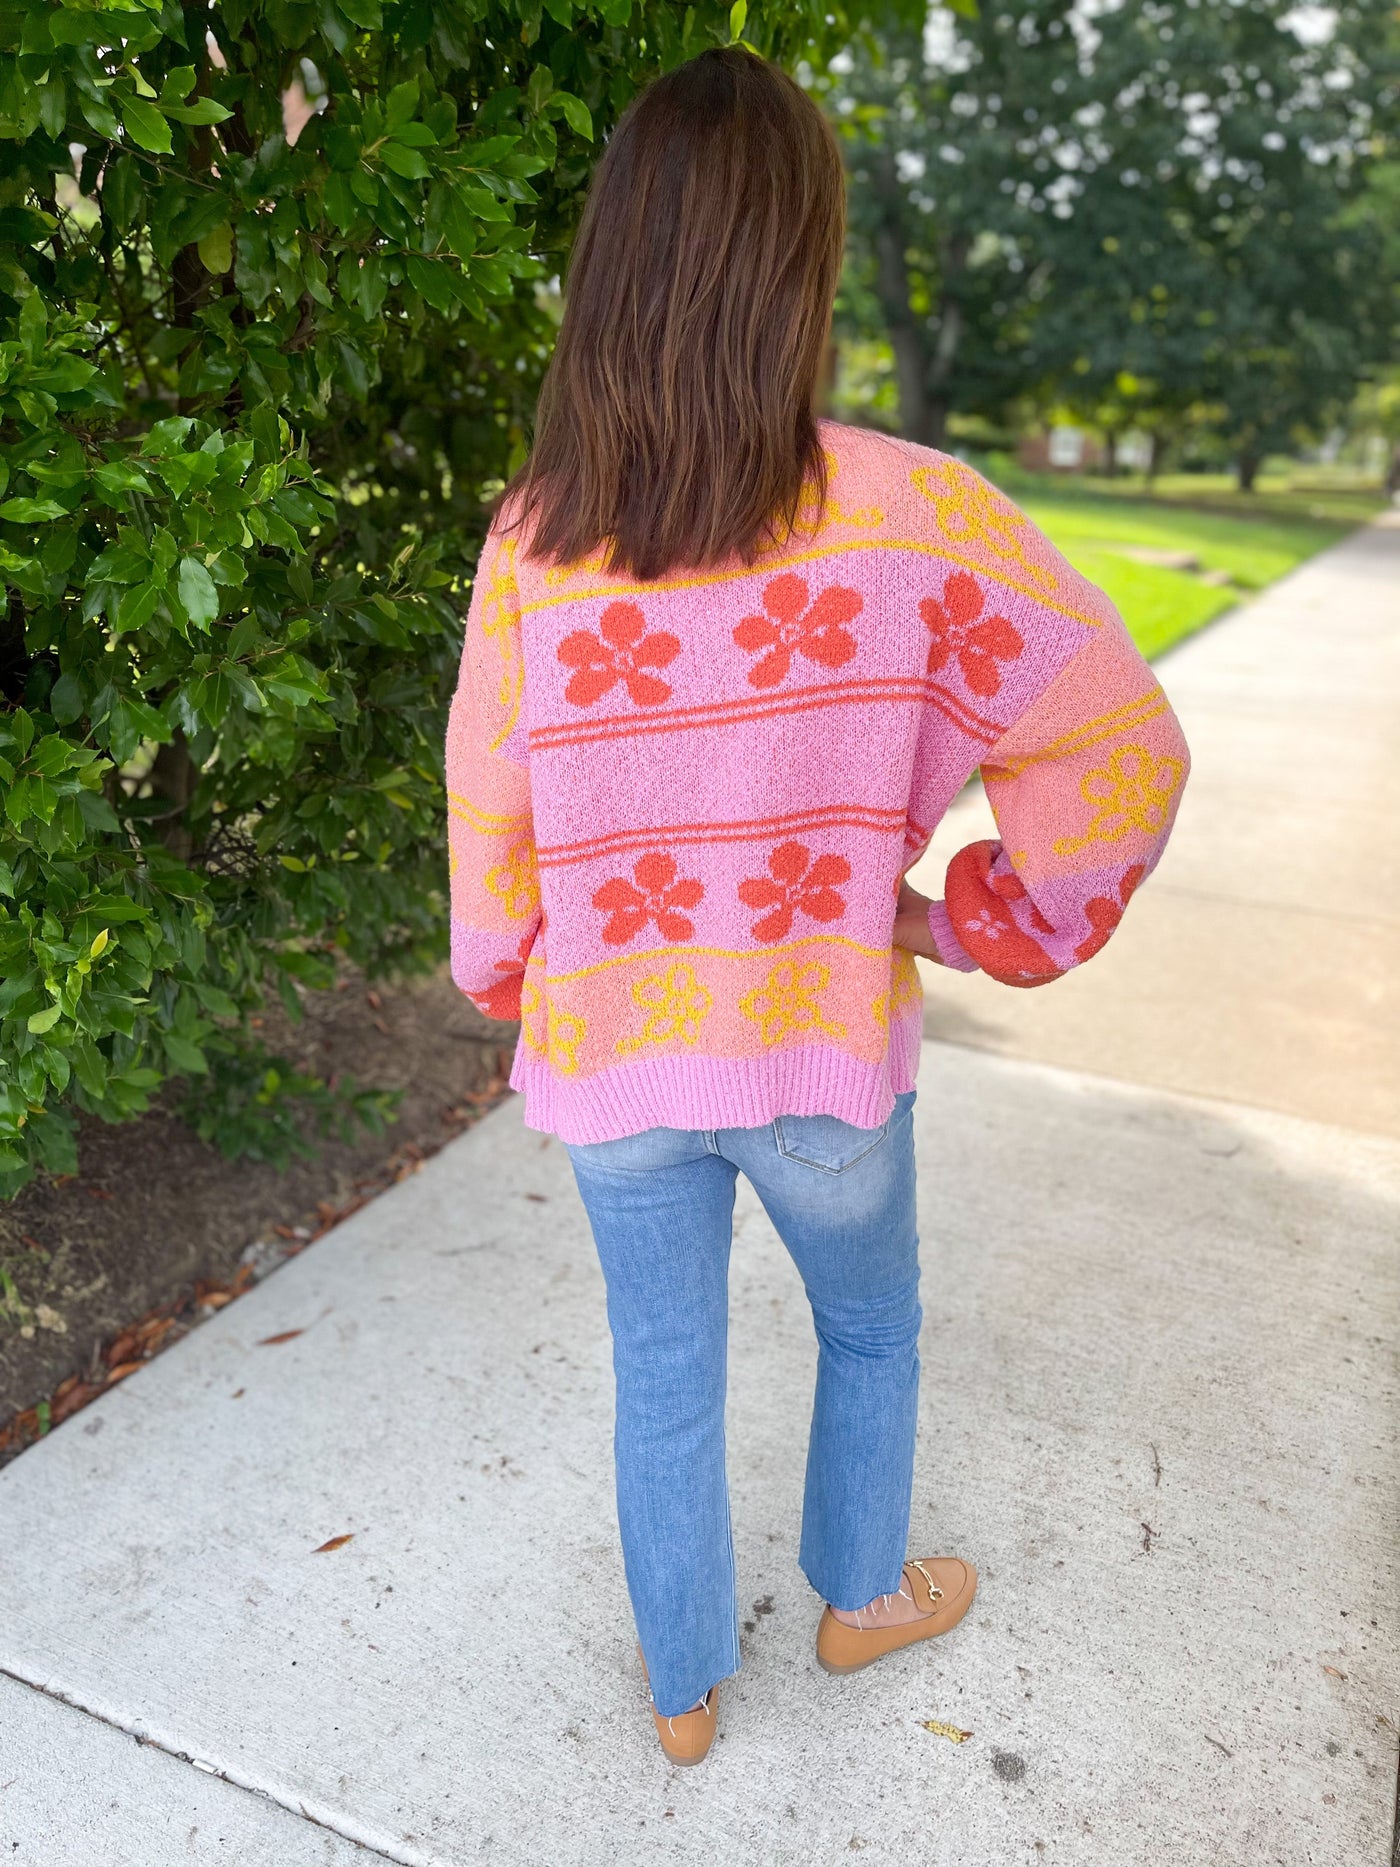 Oversized Floral Sweater Knit Cardigan